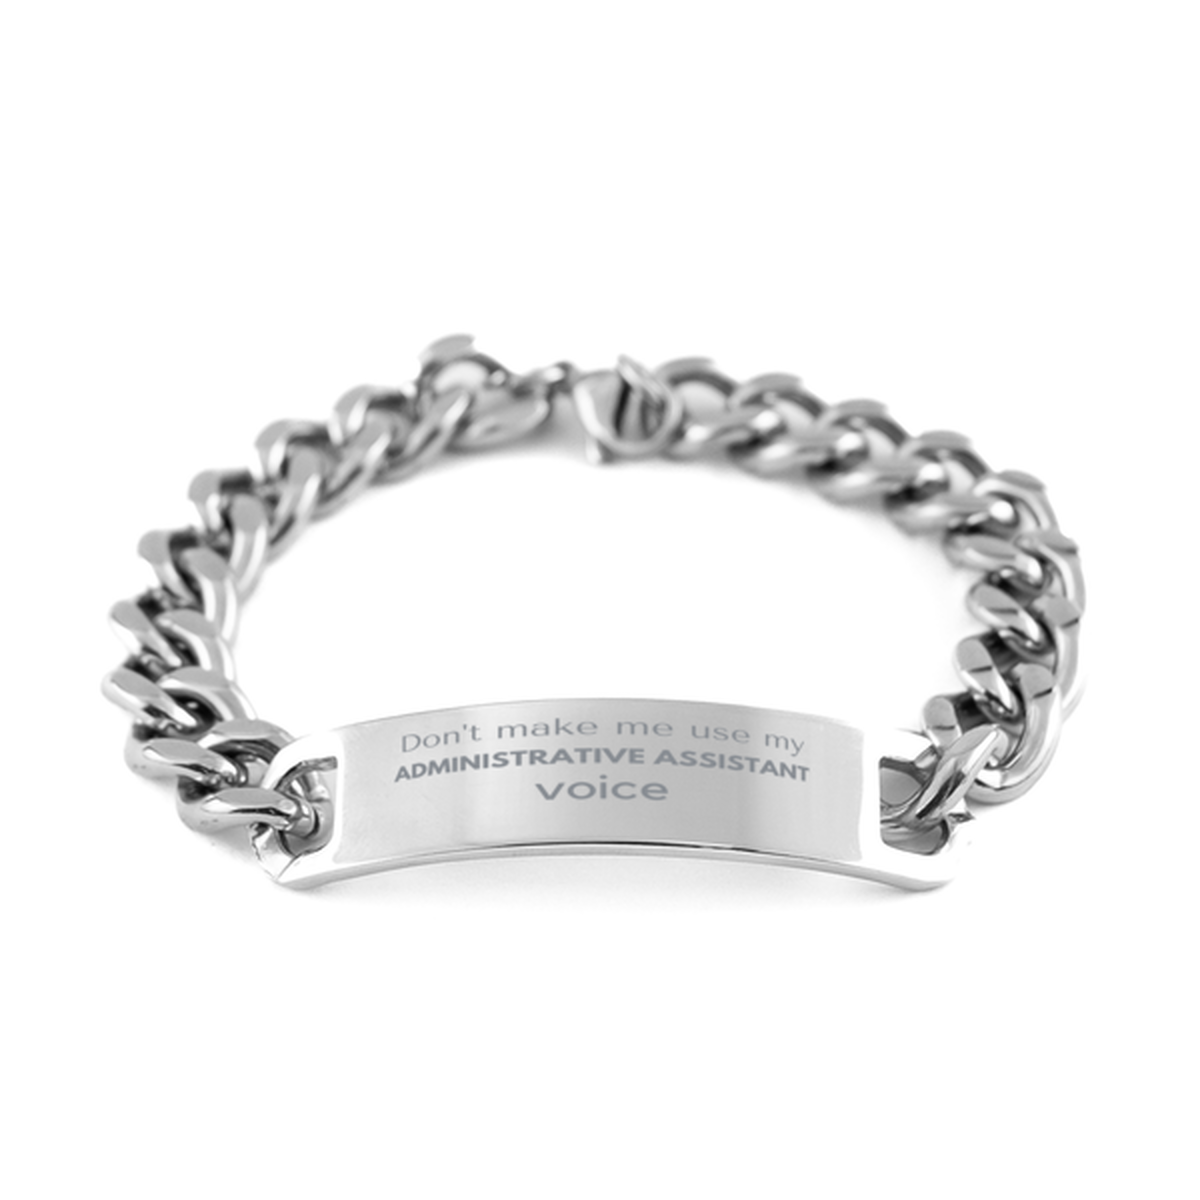 Don't make me use my Administrative Assistant voice, Sarcasm Administrative Assistant Gifts, Christmas Administrative Assistant Cuban Chain Stainless Steel Bracelet Birthday Unique Gifts For Administrative Assistant Coworkers, Men, Women, Colleague, Frien